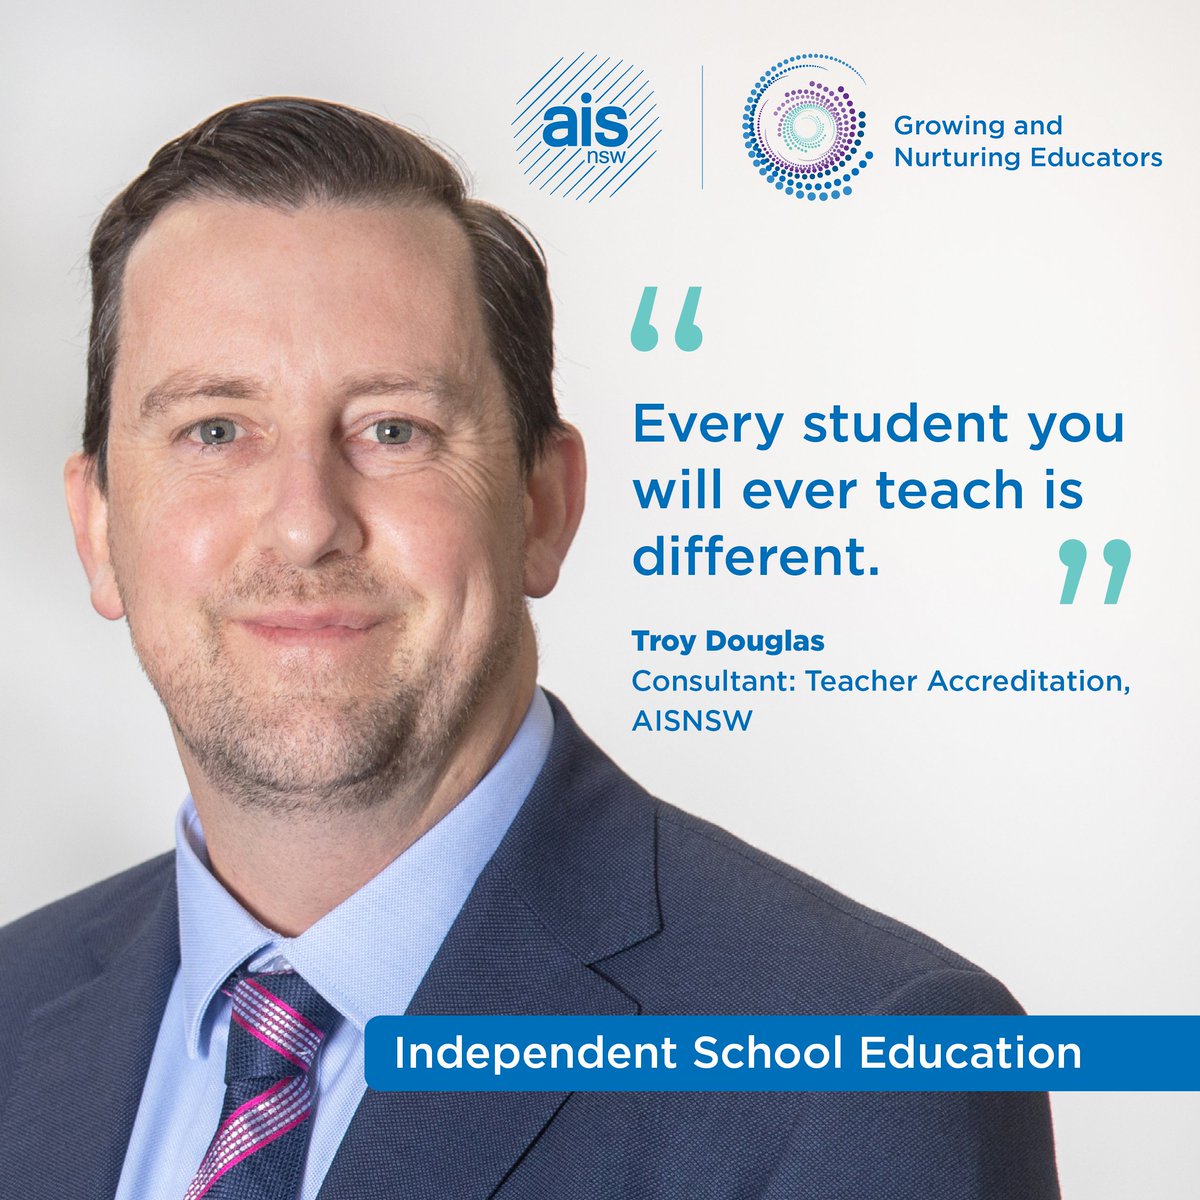 Why do people join the teaching profession? We asked some AISNSW consultants why they decided to teach. 
#GrowingNurturingEducators
ow.ly/PvLZ50PXrEh